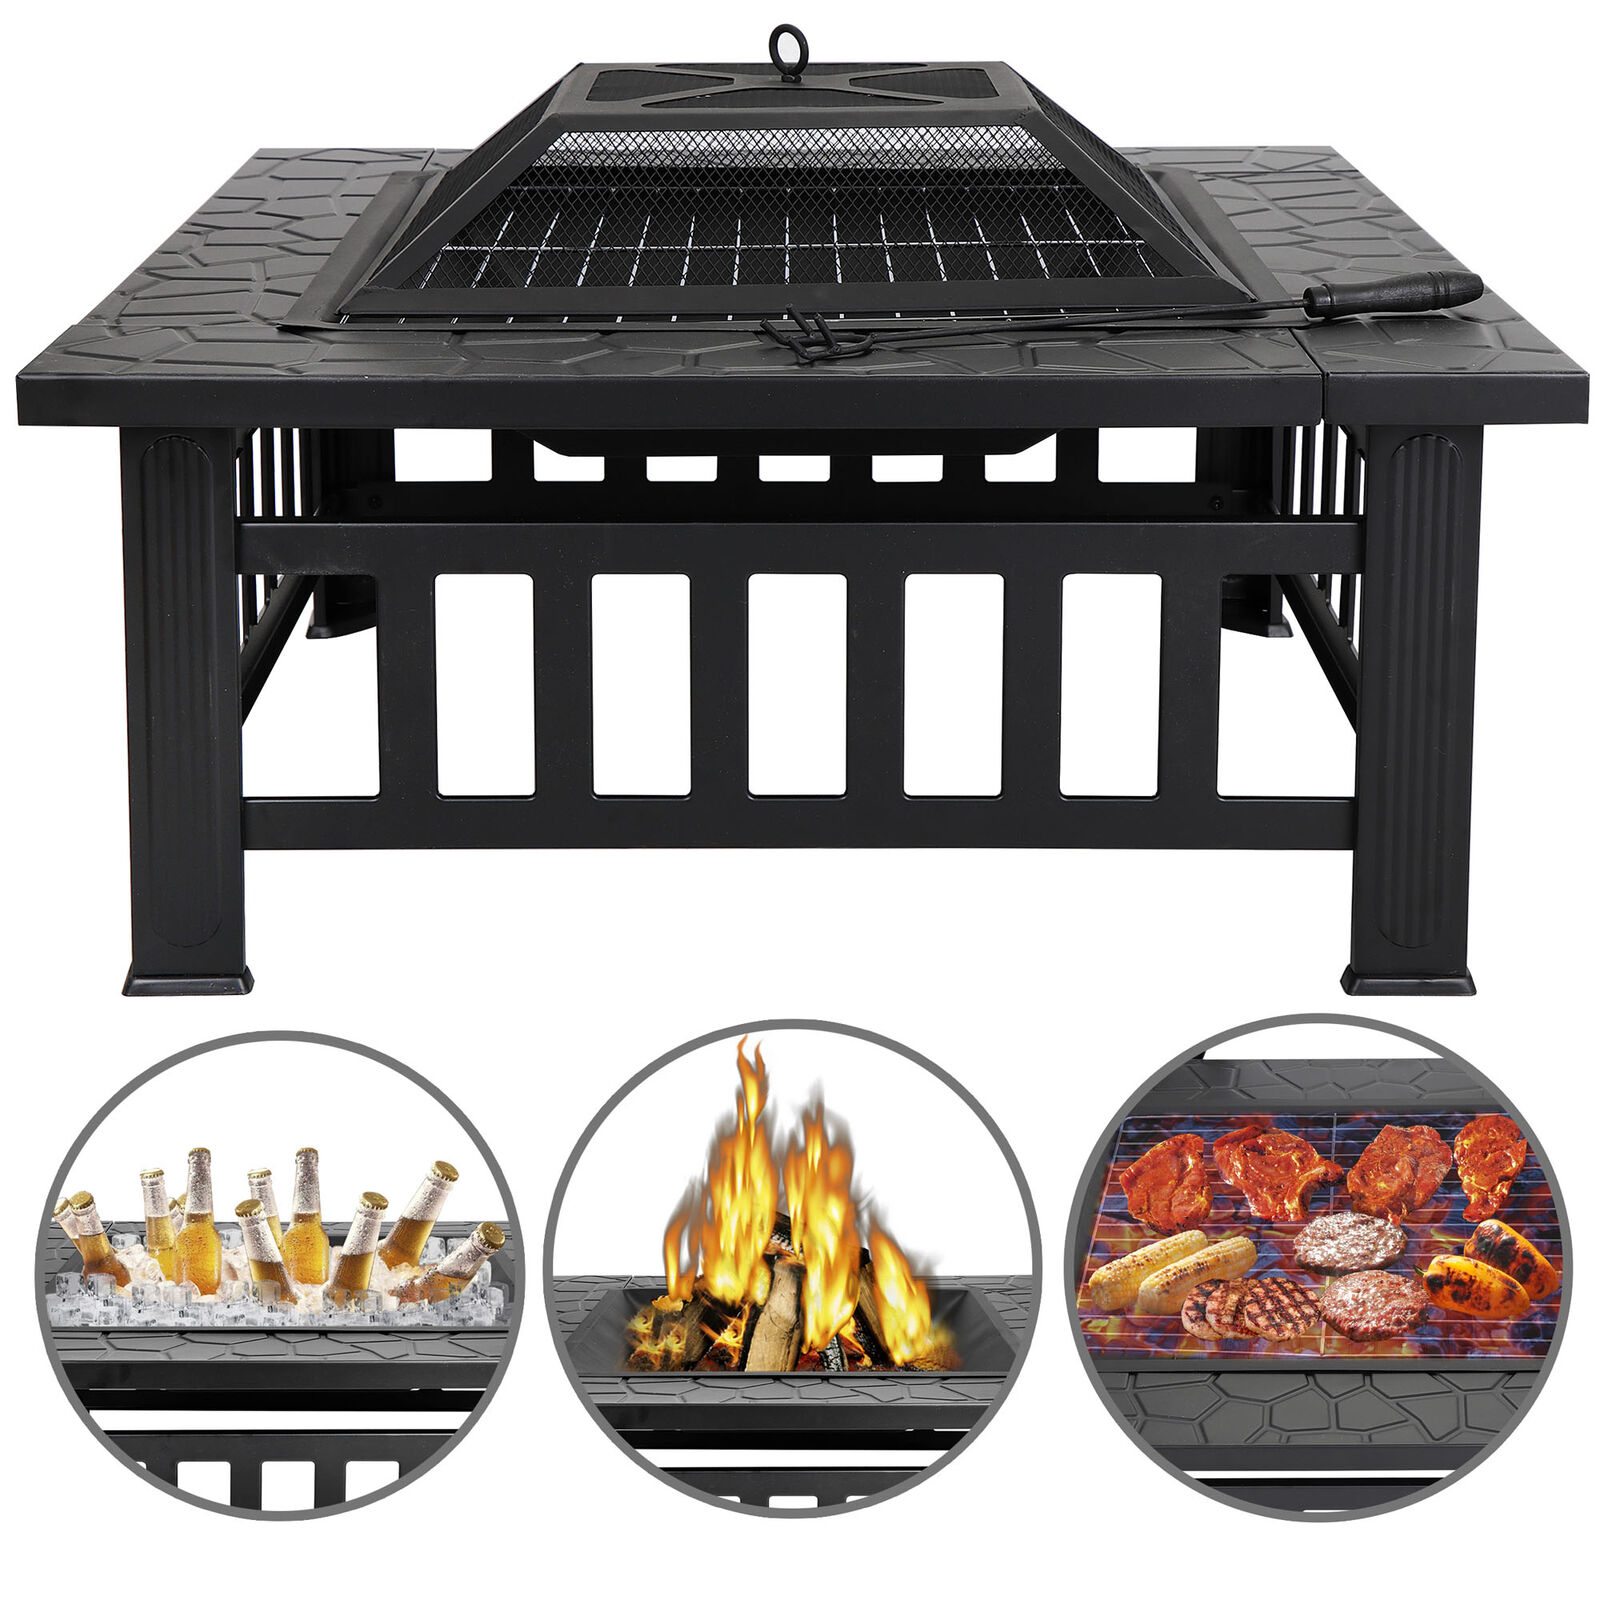 32" Square Fire Pit Outdoor Patio Metal Heater Deck Backyard Fireplace W/cover